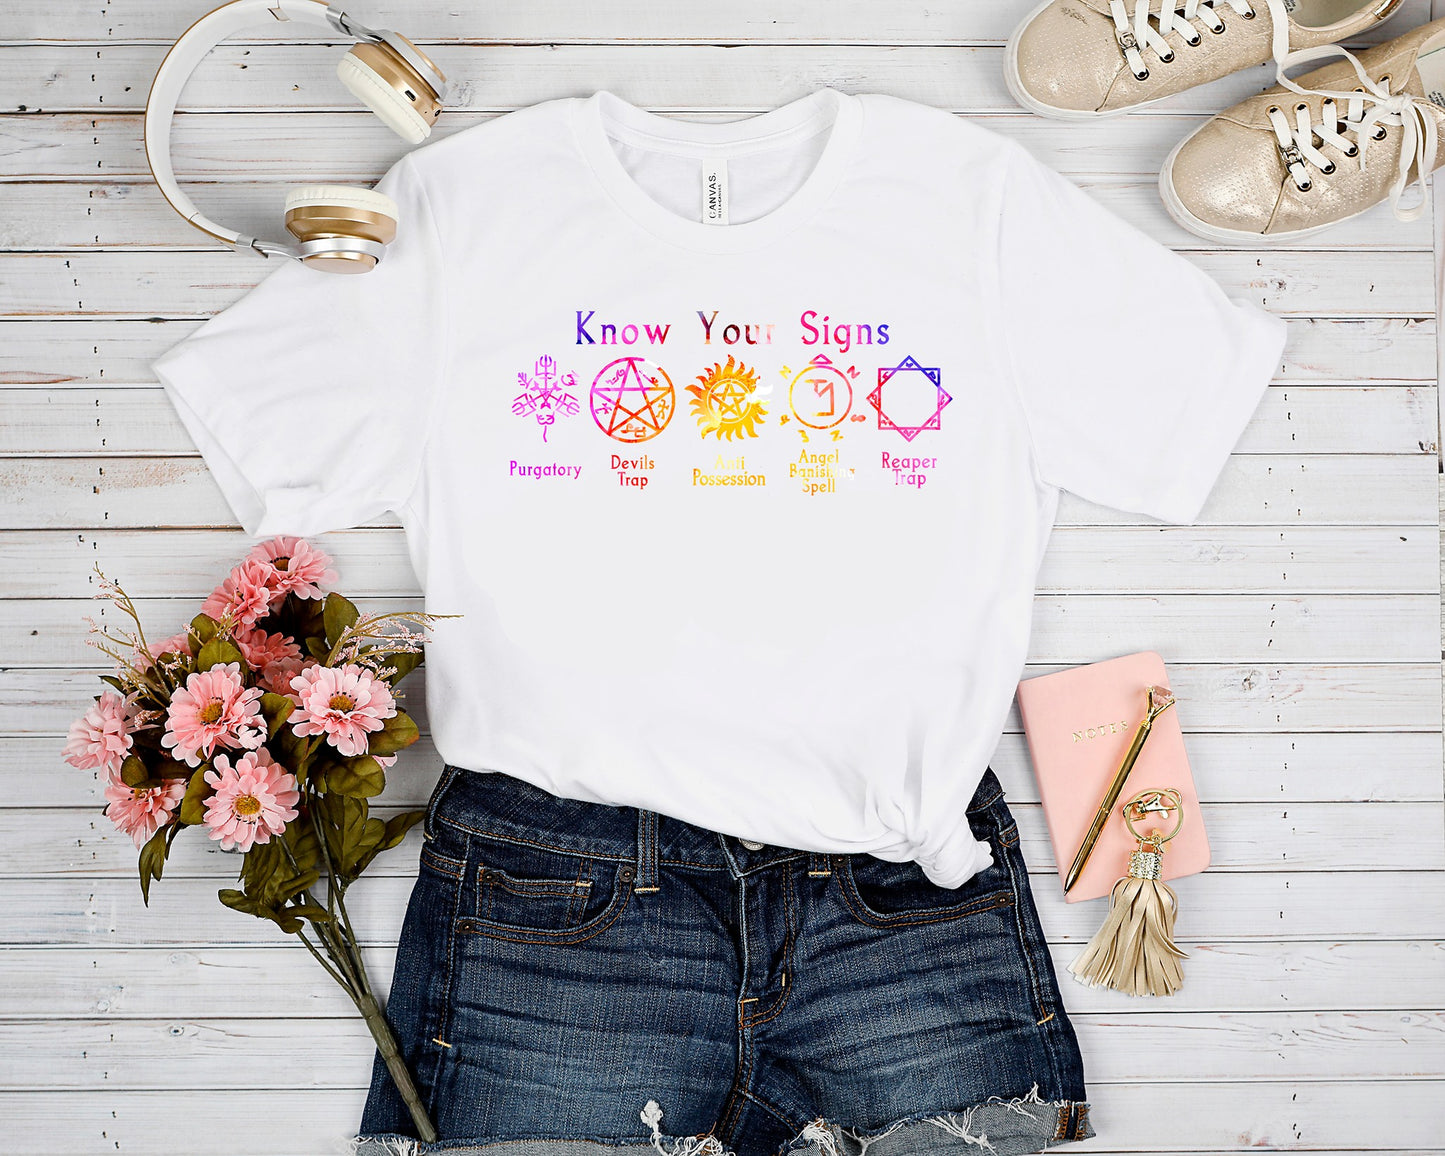 OUTFIT RUN 3-COLORFUL SUPERNAT KNOW YOUR SIGNS TEE